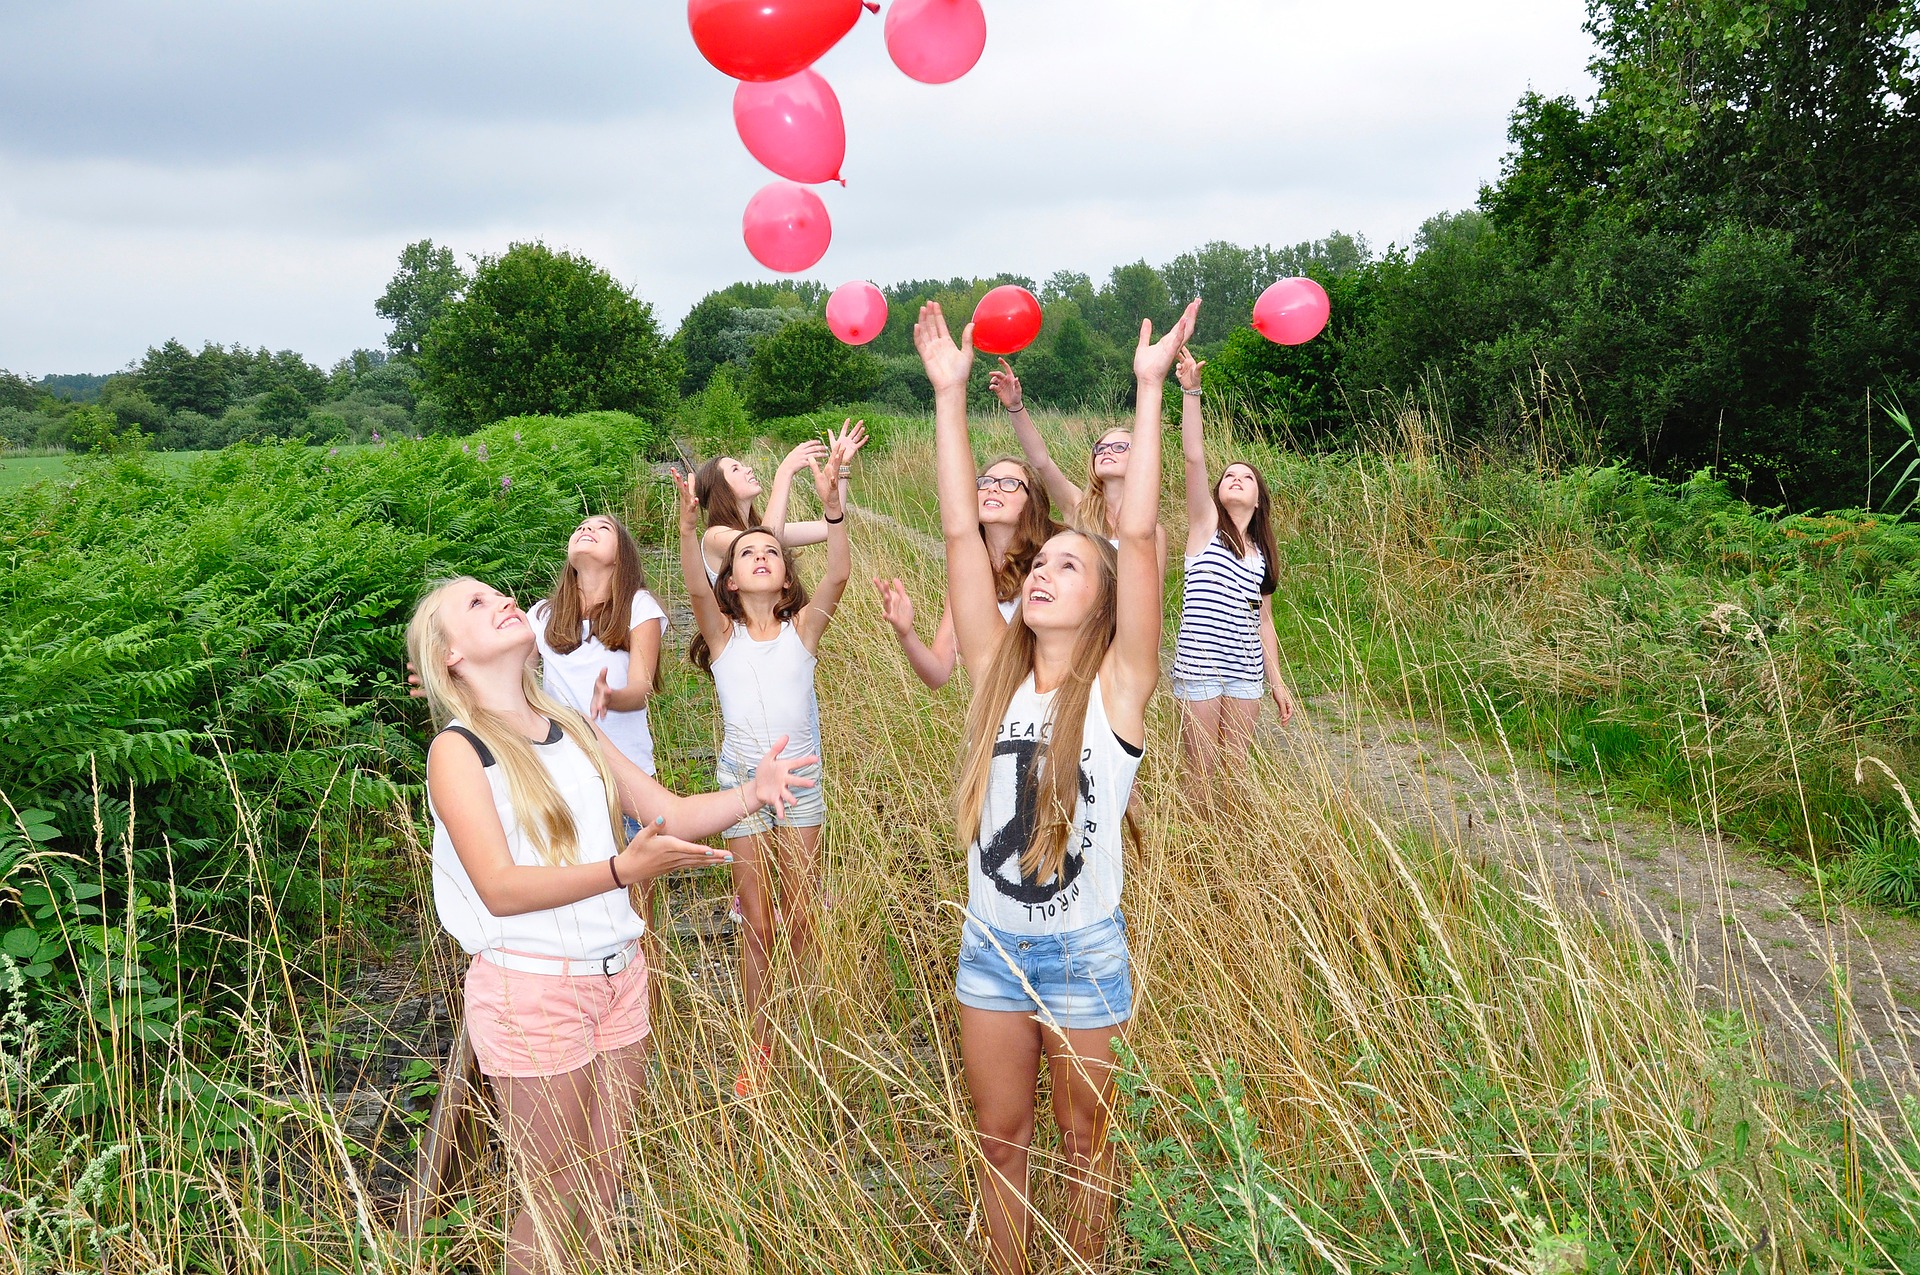 A group of teenage girls stand in a grassy field, releasing ink balloons into the air.